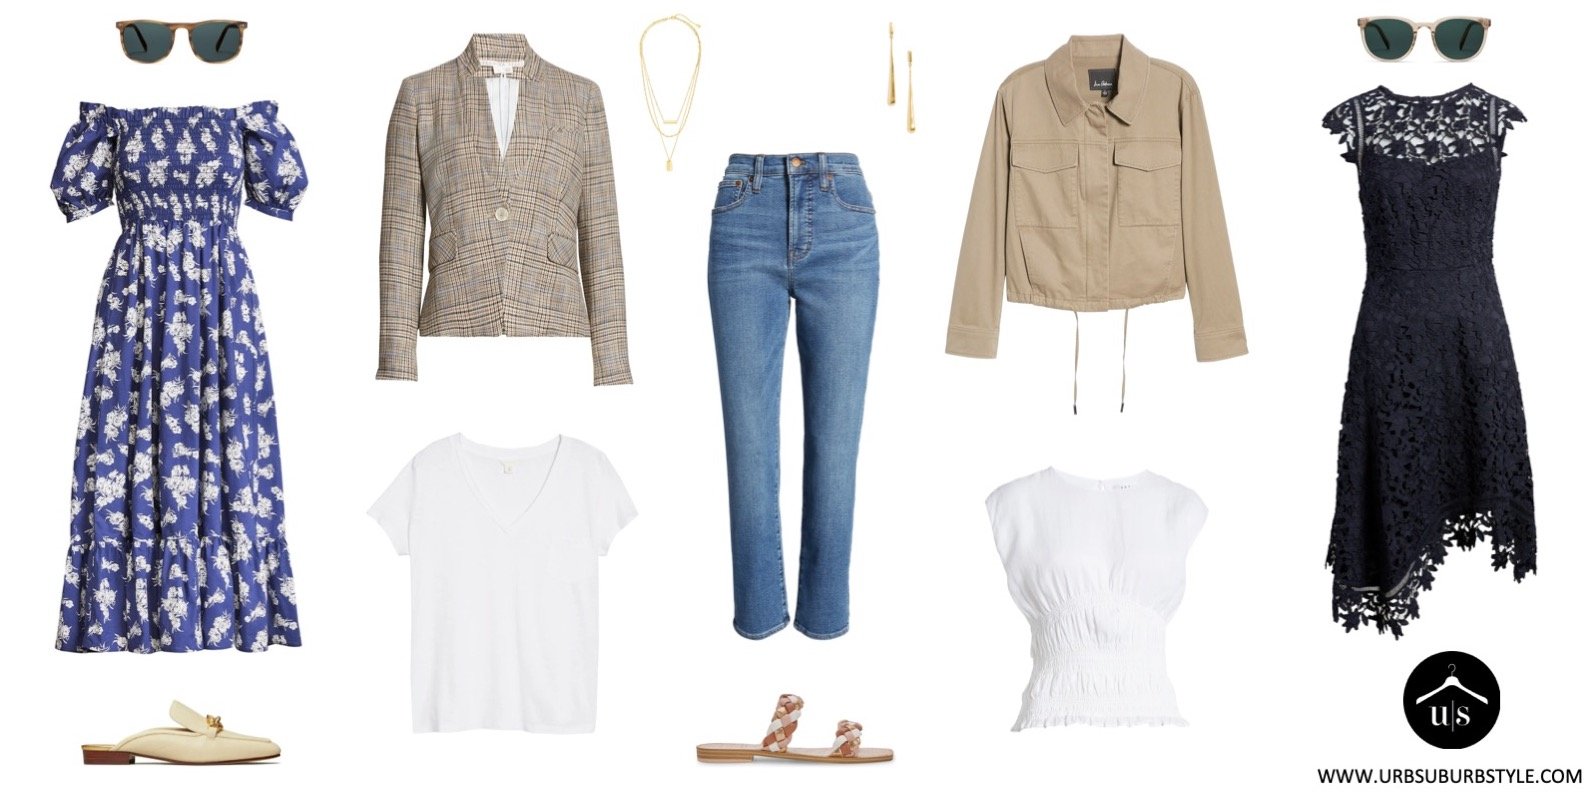 Don't Know What To Wear? Try These 3 Simple Outfit Ideas - Next